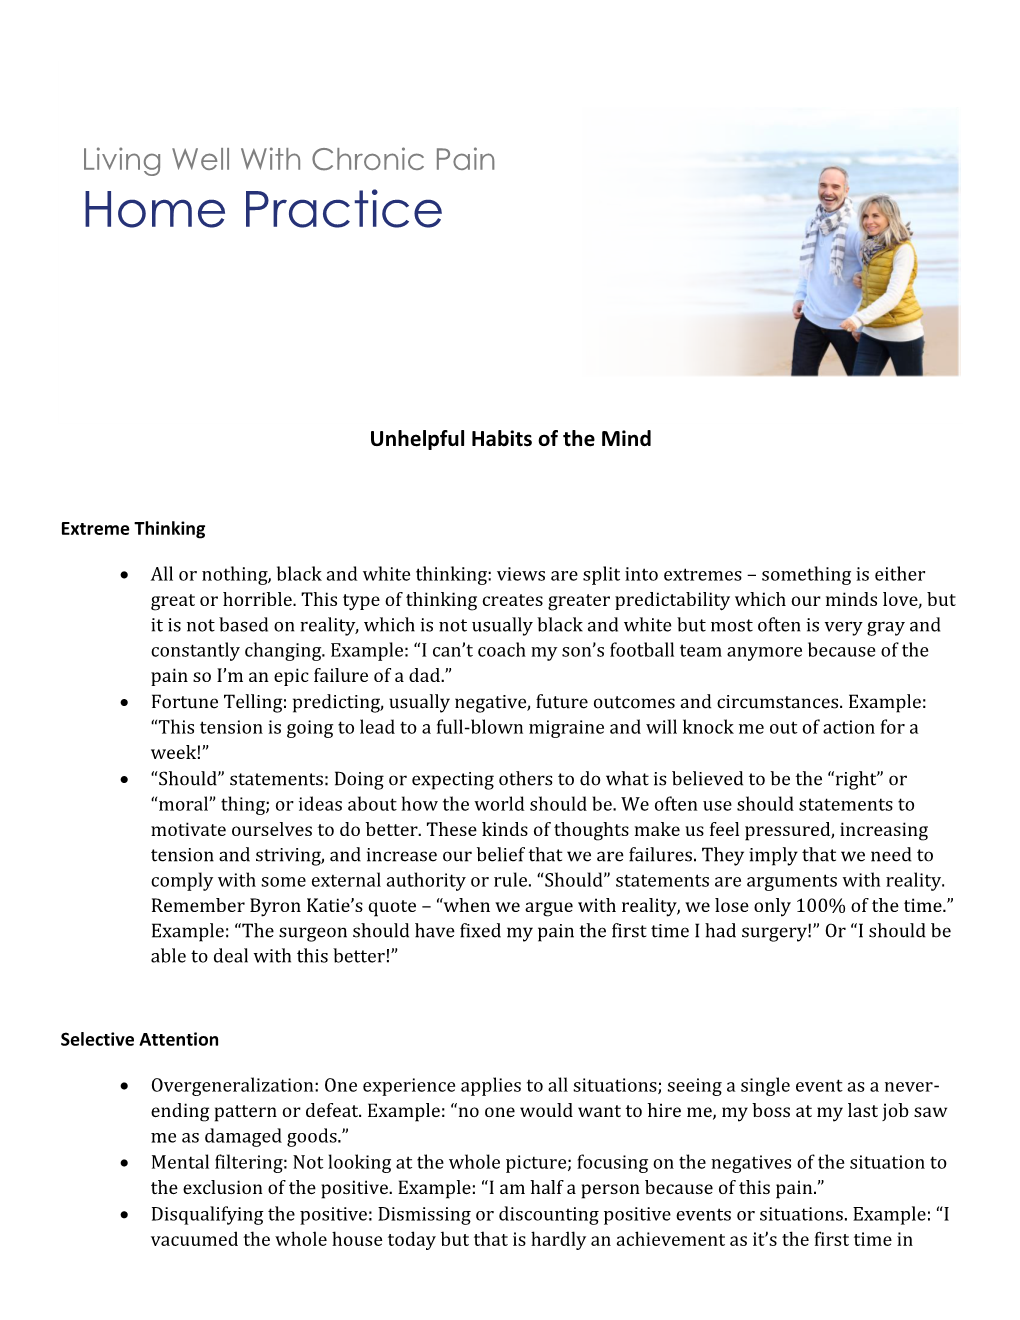 Living Well with Chronic Pain Session 1 Home Practice